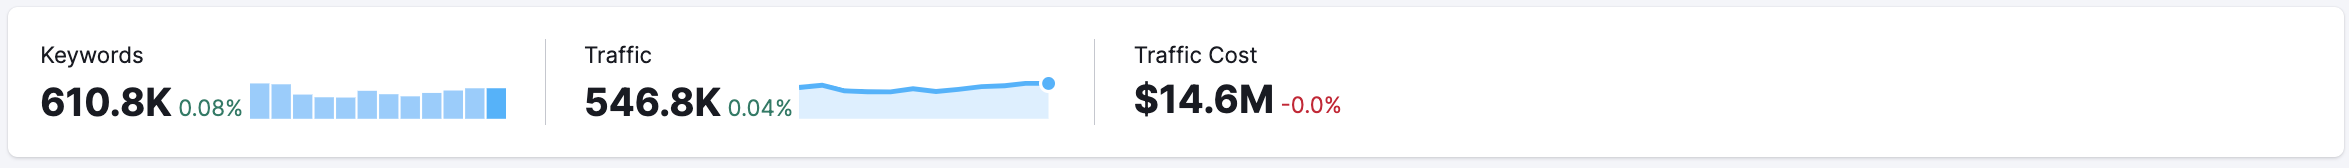 Example of metrics: keywords, traffic, and traffic cost. 